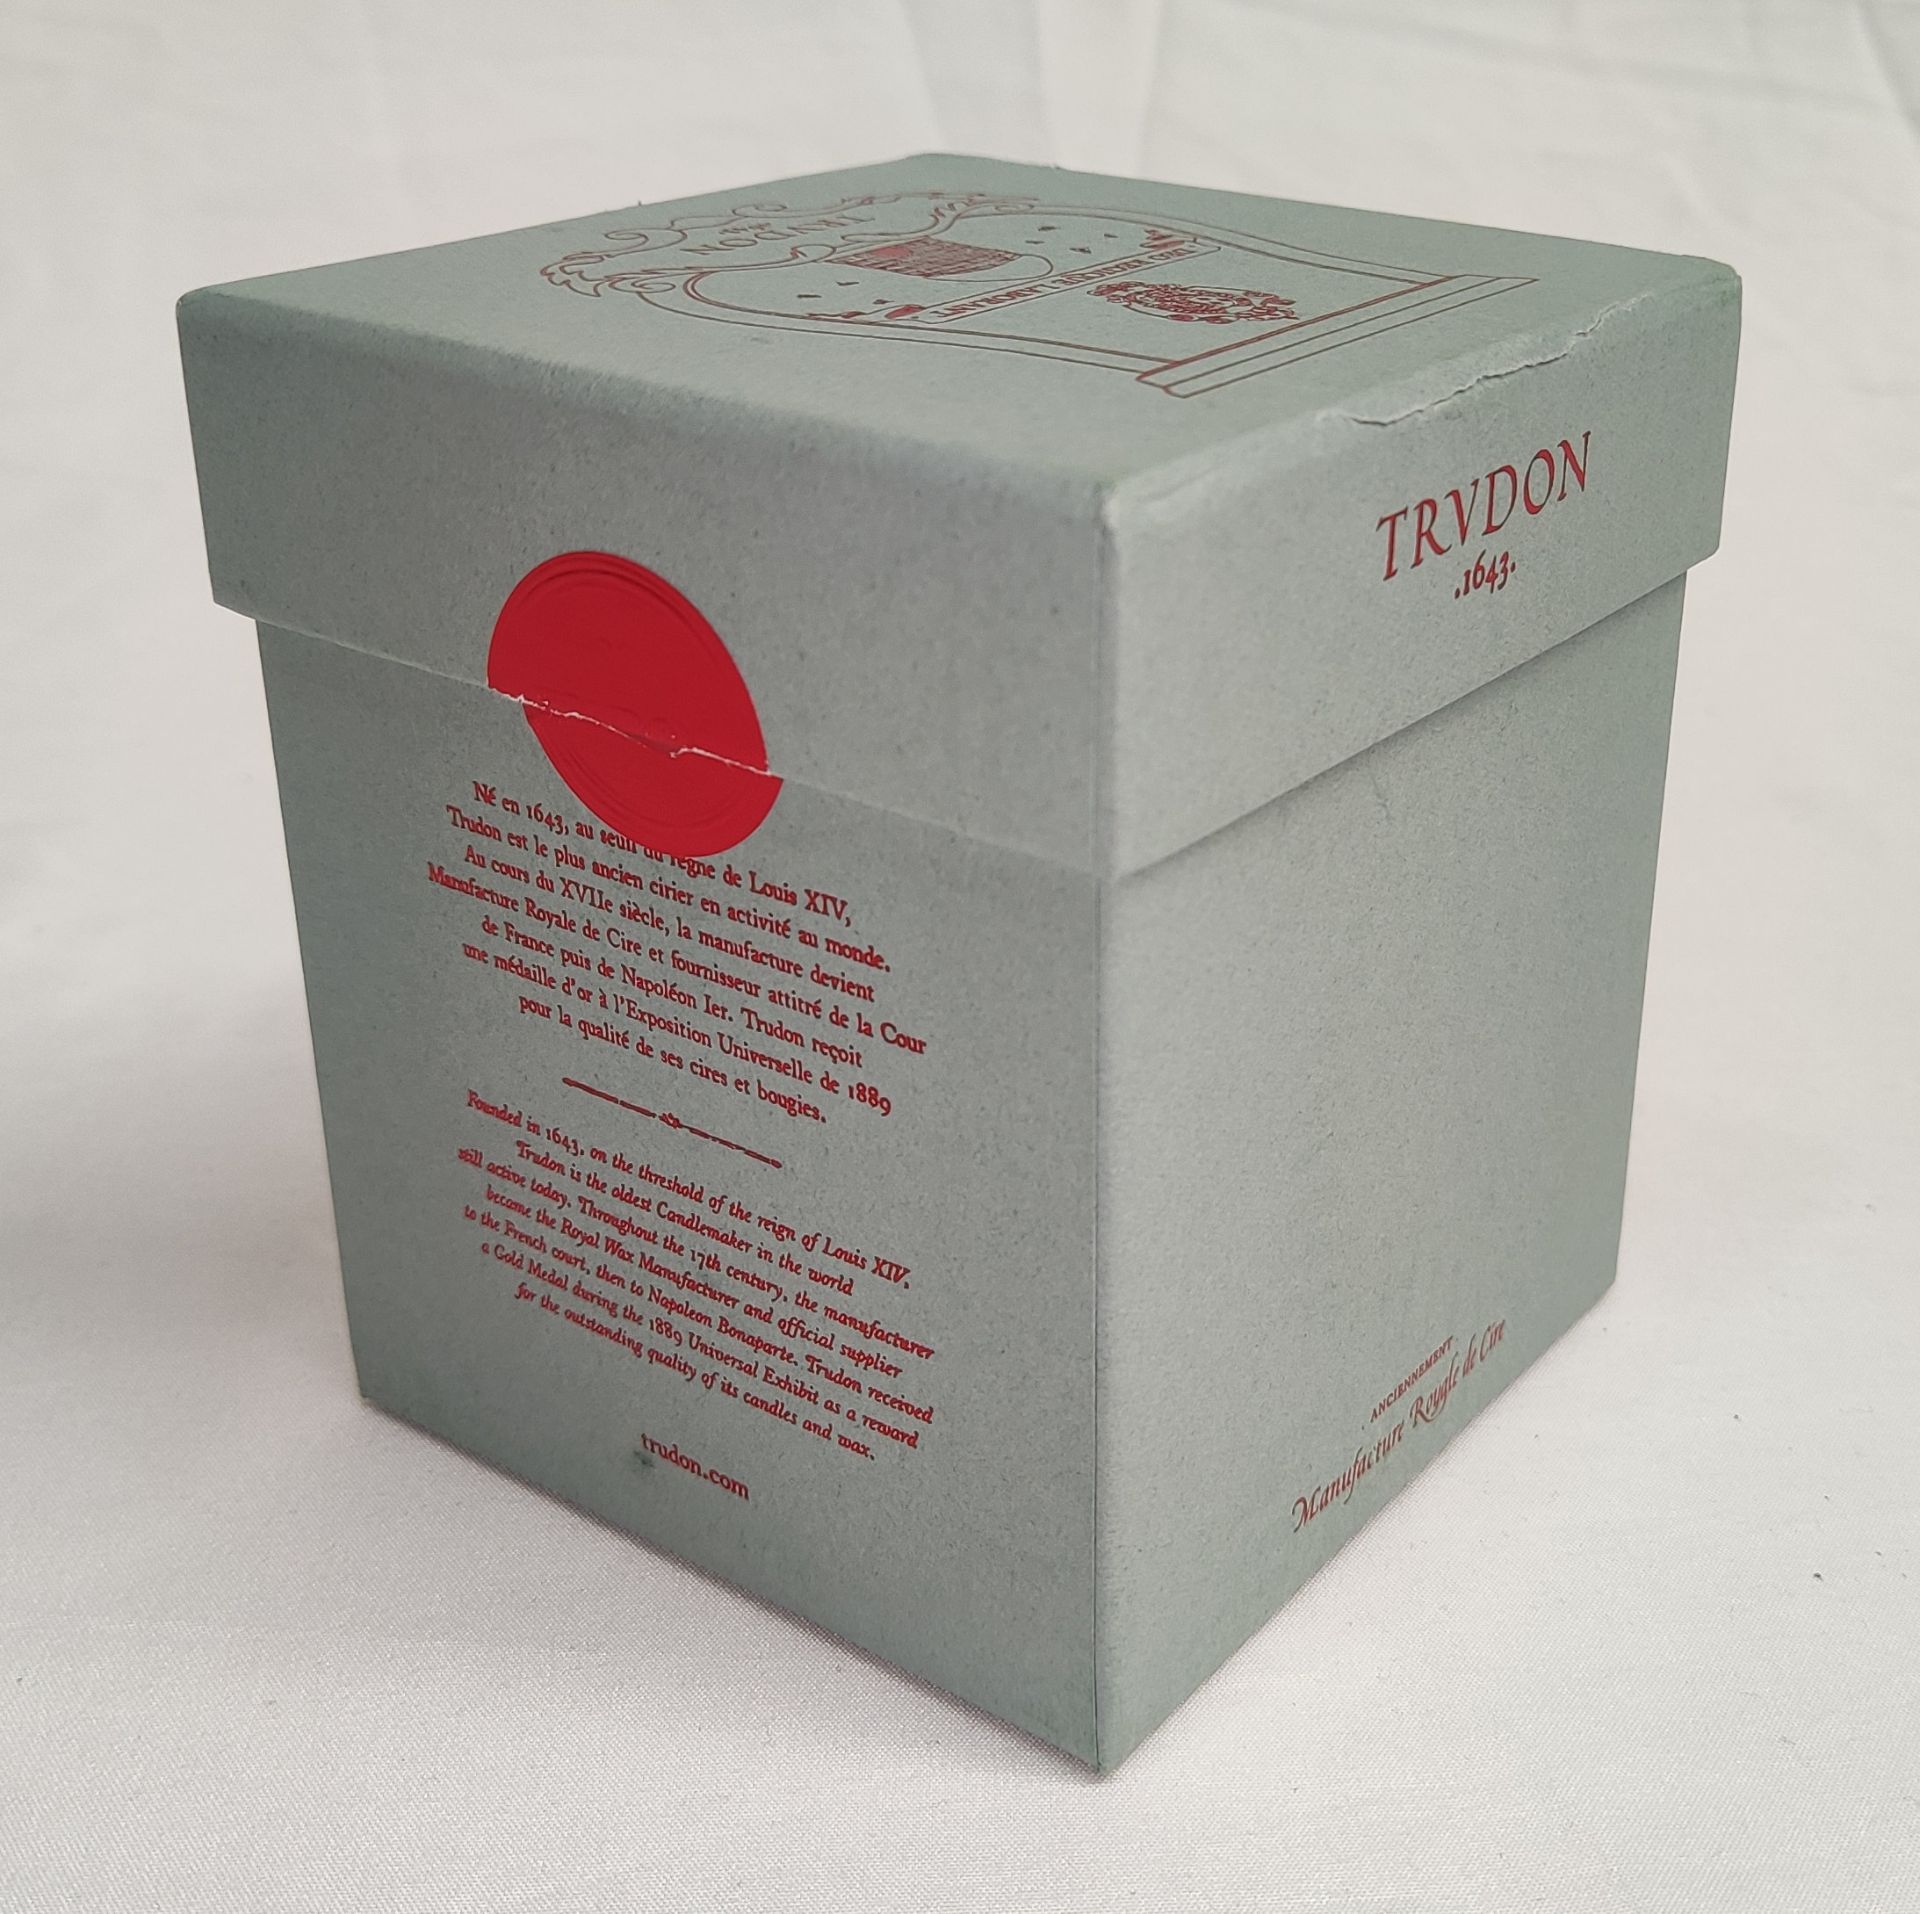 1 x TRUDON Ernesto 270G Candle - Boxed - Original RRP £90 - Ref: 2559342/HJL409/C27/07-23 - - Image 11 of 16